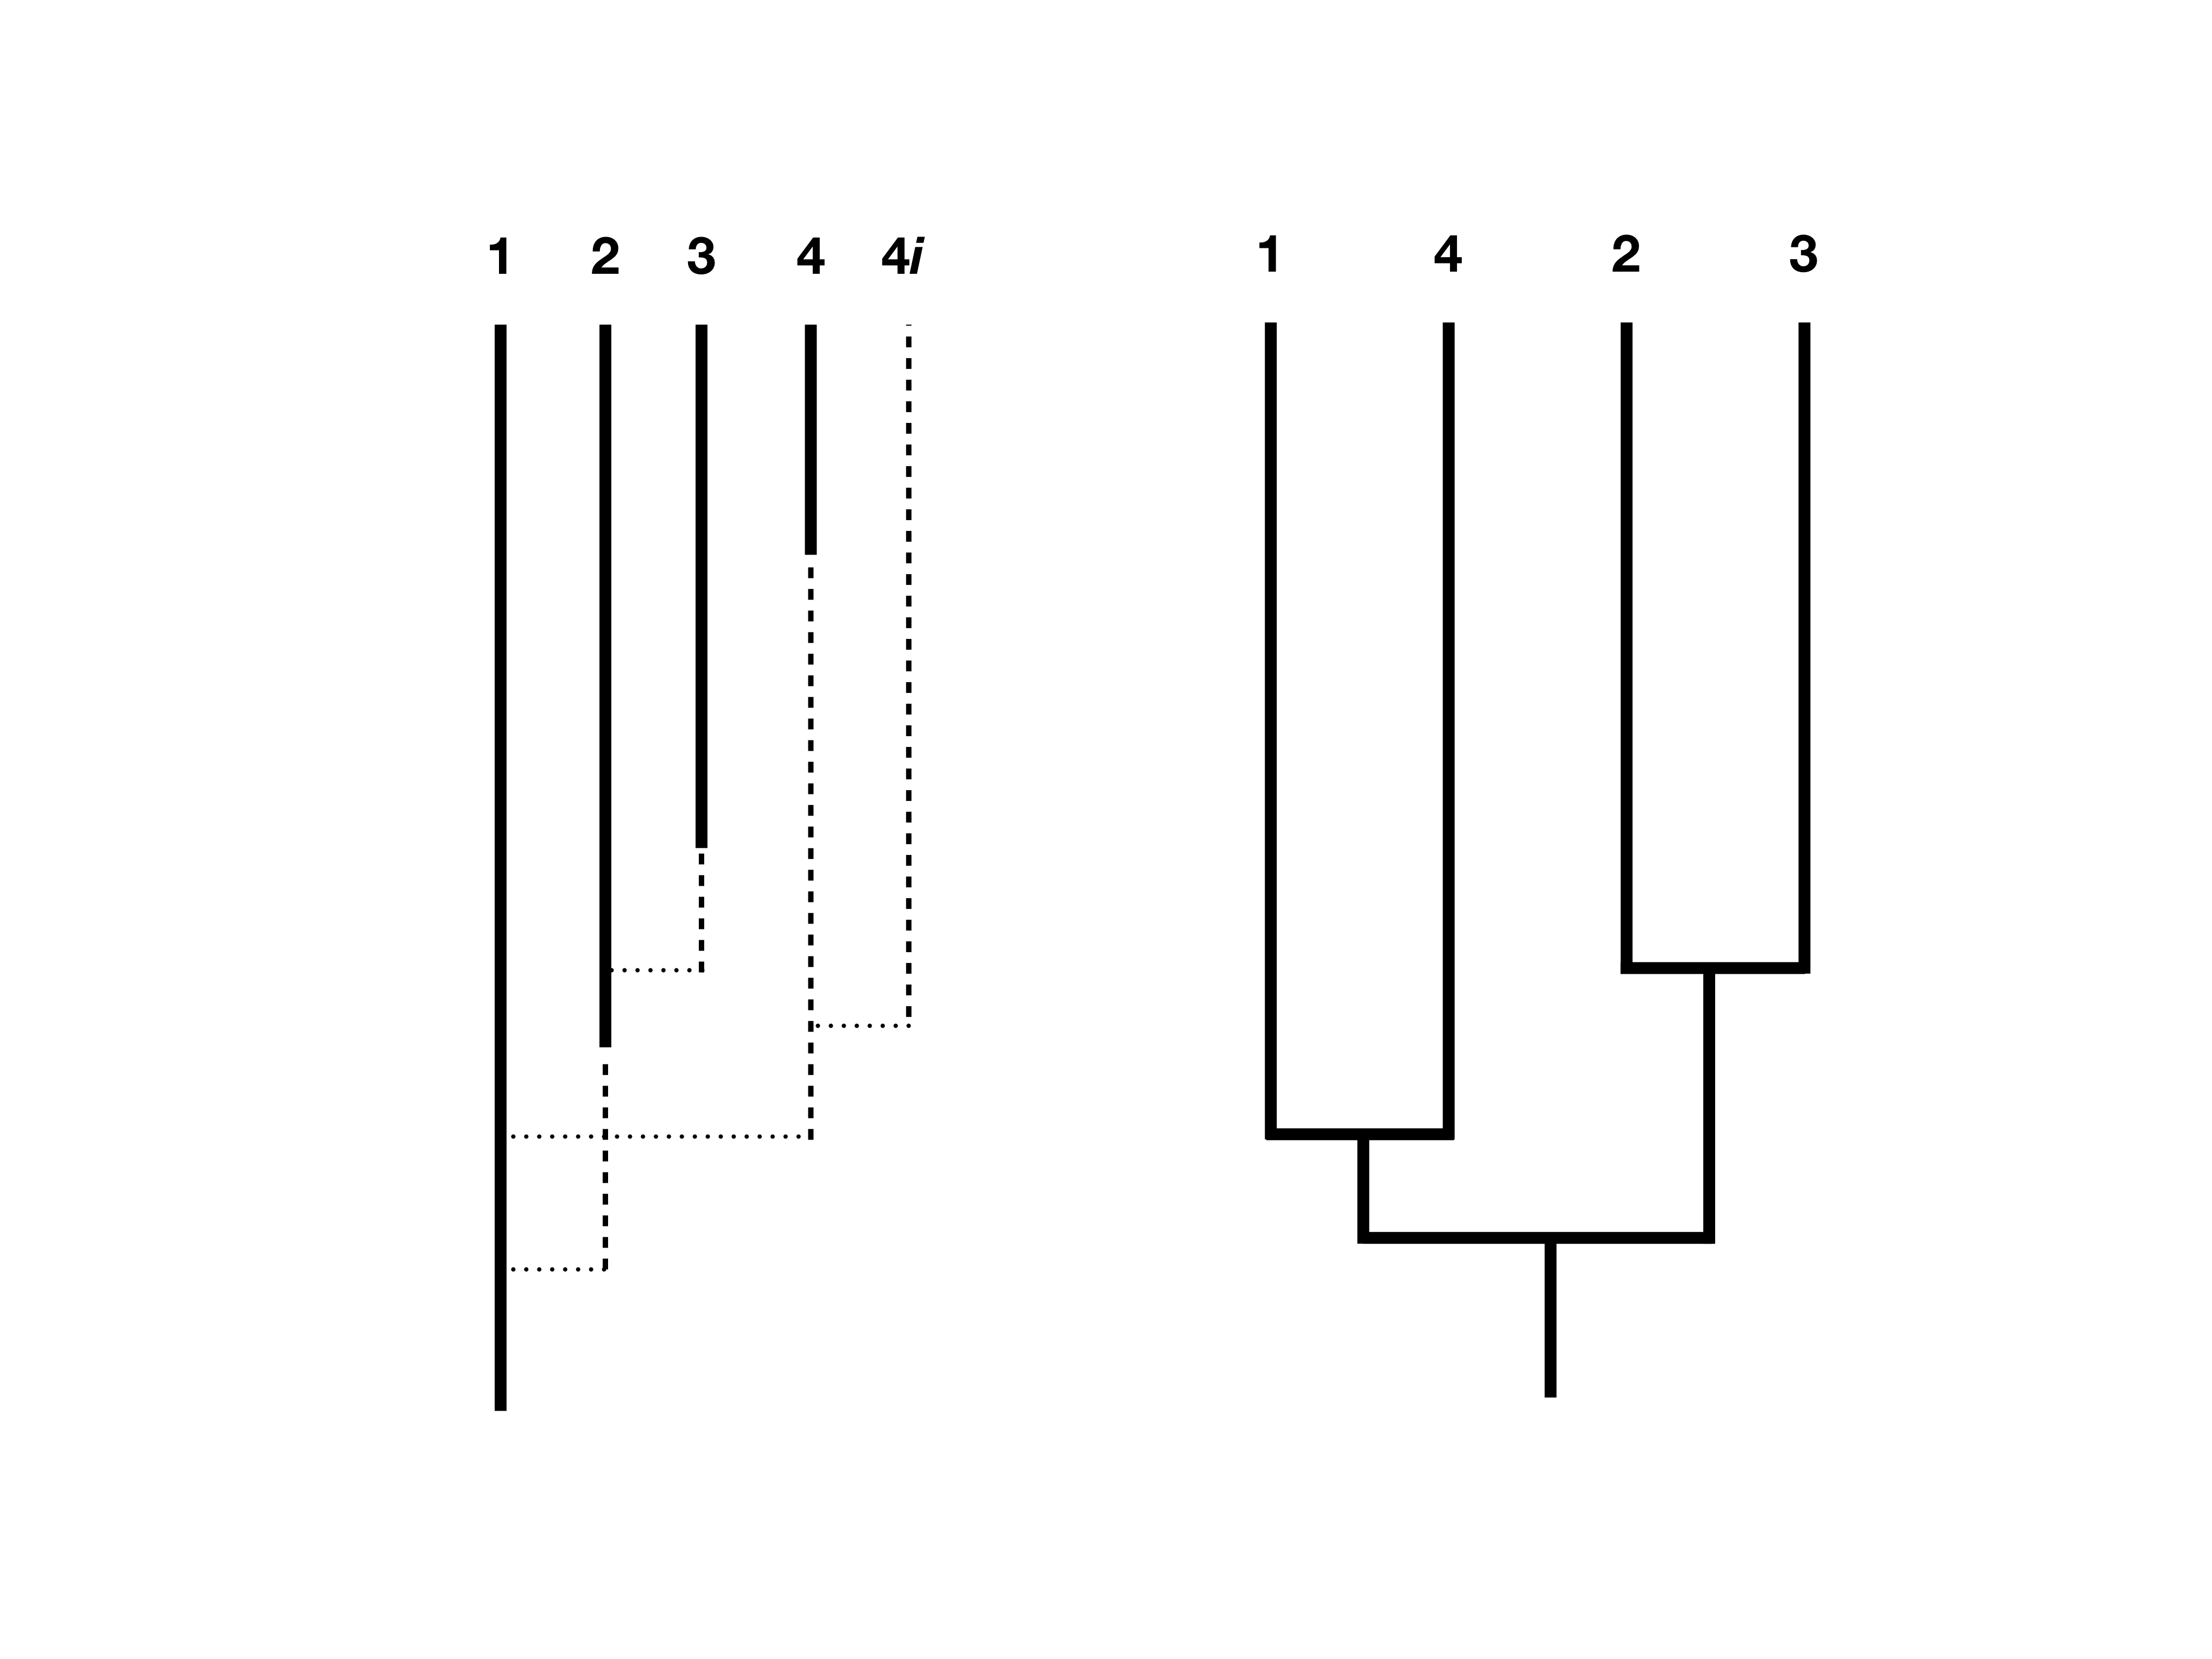 Figure 12.5. An illustration of the protracted model of speciation on a phylogenetic tree. Panel A shows the growing tree including full (solid lines) and incipient species (dotted lines). Incipient species become full at some rate, and if that does not occur before sampling then they are not included in the final species tree (panel B; e.g. lineage 4i). Redrawn from Lambert et al. (2015). Image by the author, can be reused under a CC-BY-4.0 license.